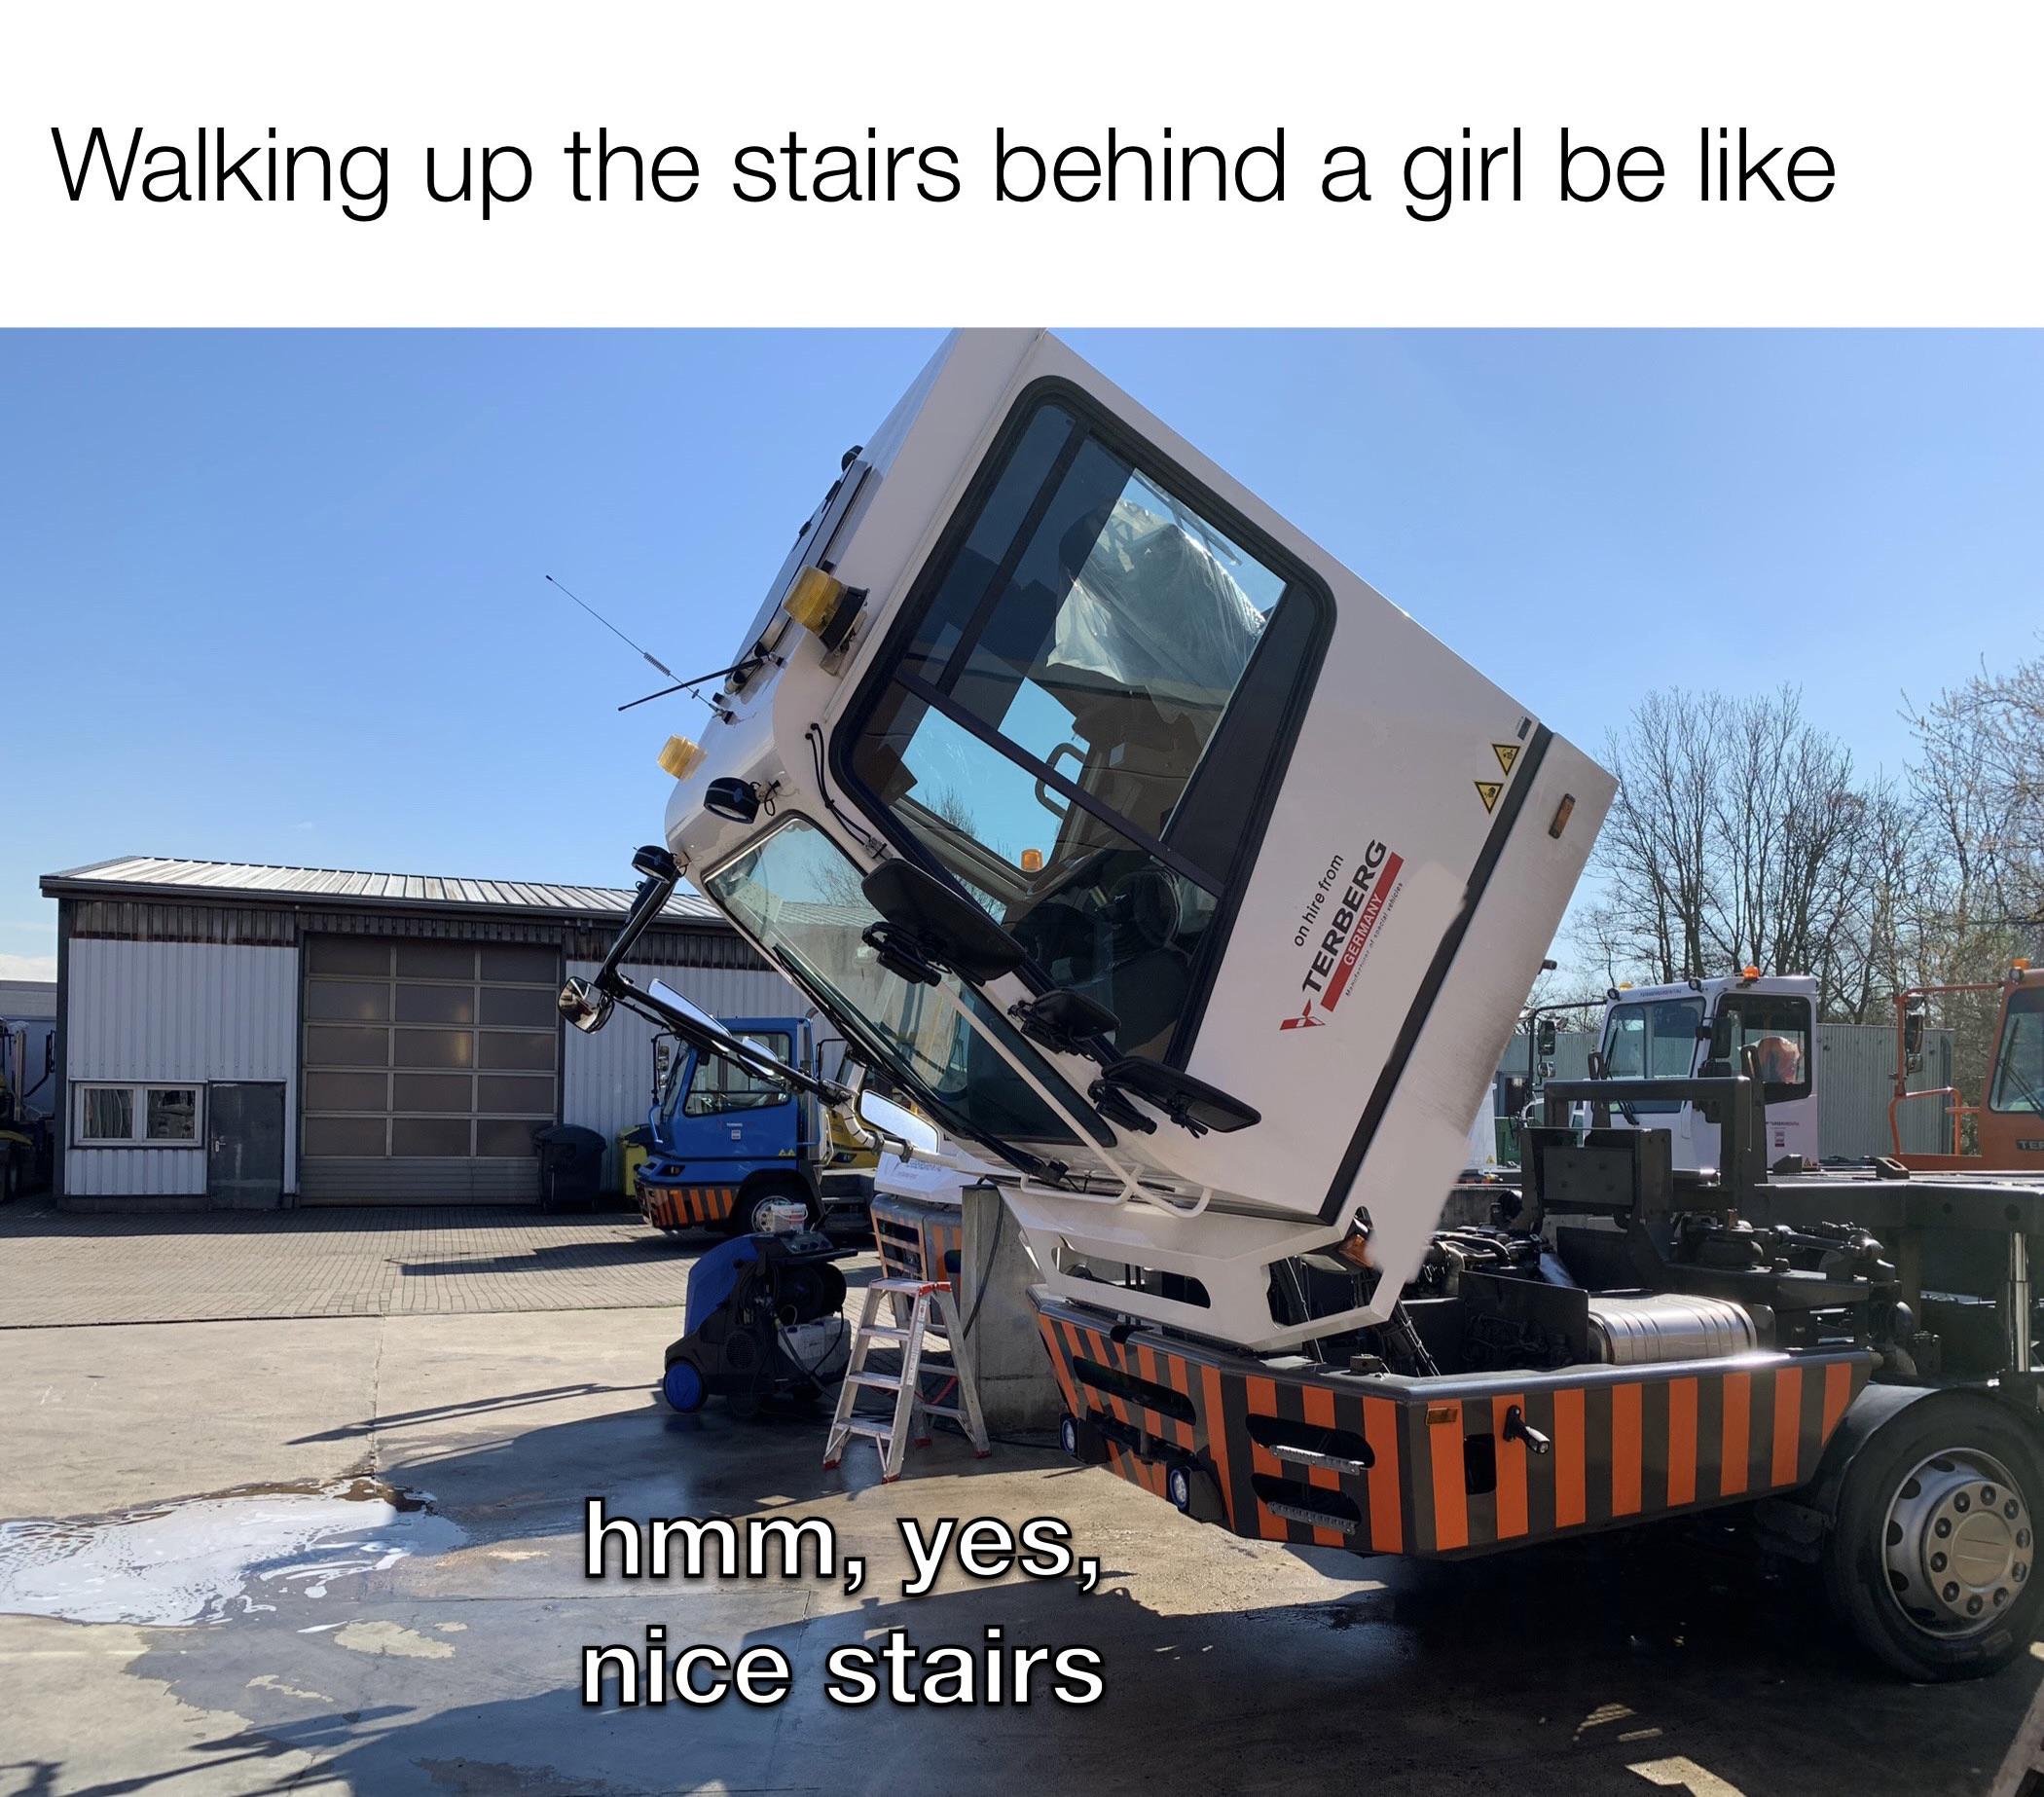 funny memes and pcis - Meme - Walking up the stairs behind a girl be www hmm, yes, nice stairs fom D Erbe Ta